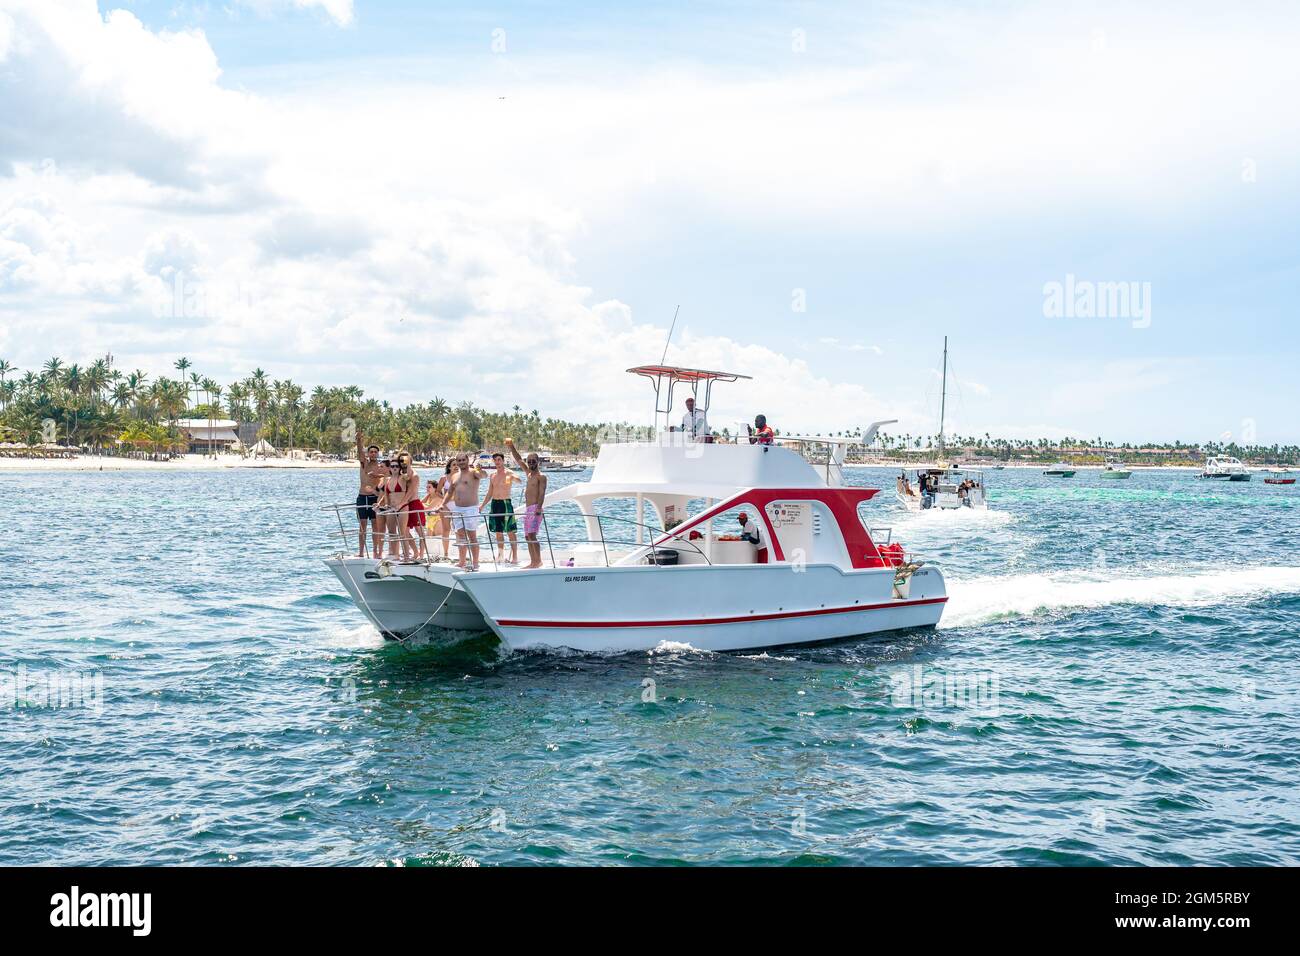 A group of Tourist Enjoying a Boat Party in the Dominican Republic. Stock Photo